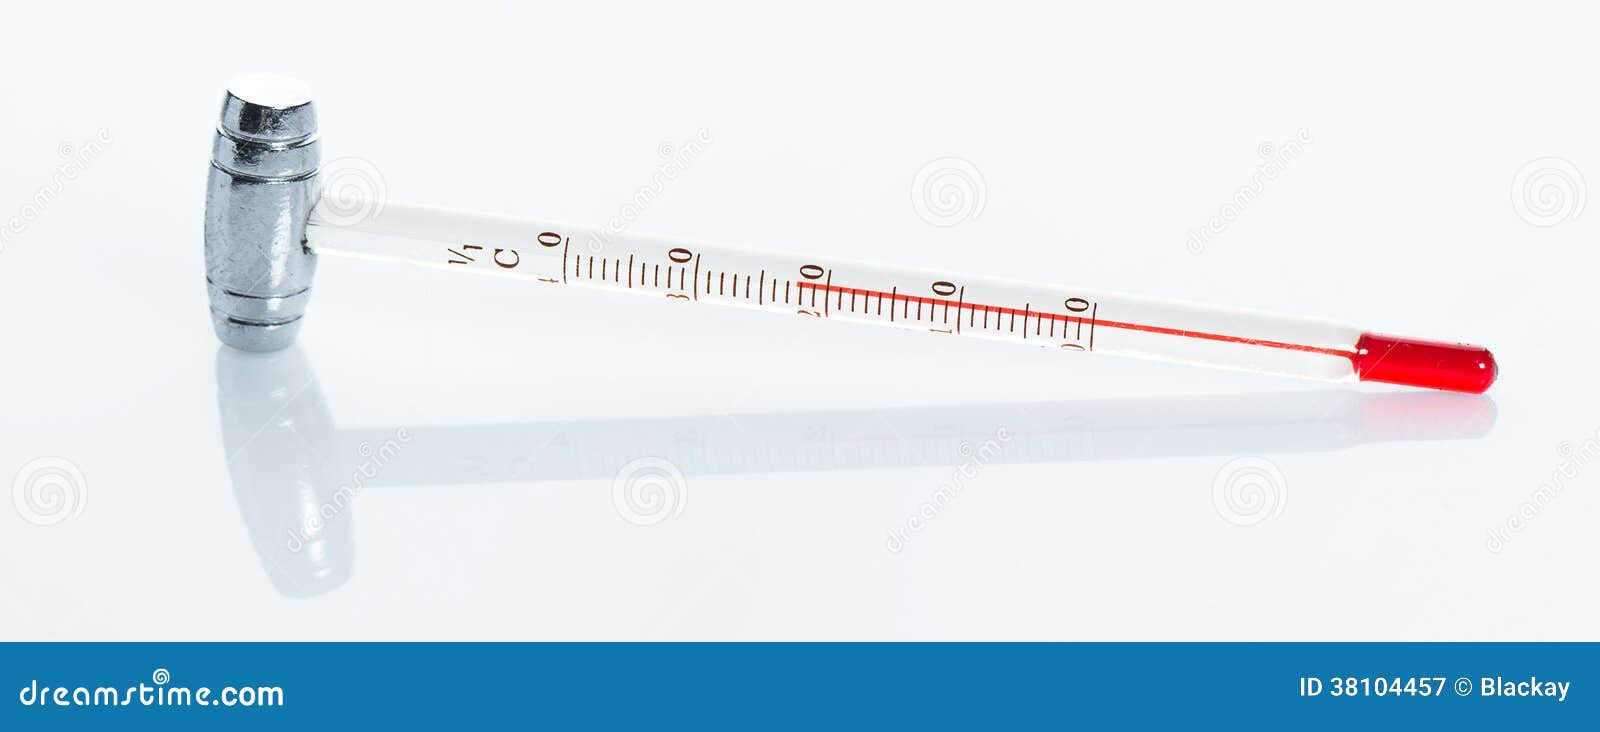 https://thumbs.dreamstime.com/z/wine-thermometer-close-up-38104457.jpg